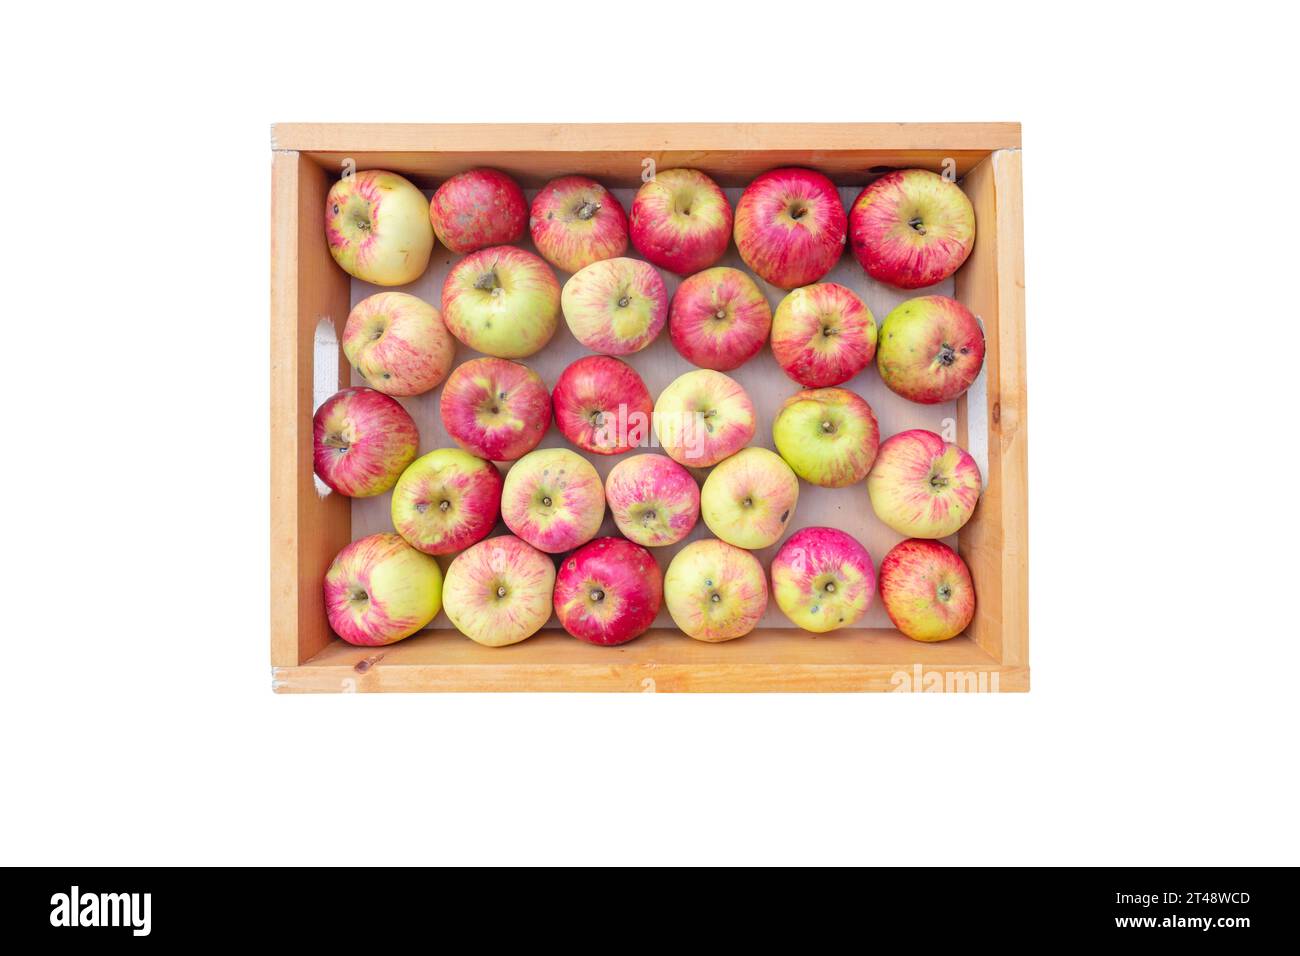 Organic red striped apple fruits in the wooden box top view isolated on white. Stock Photo